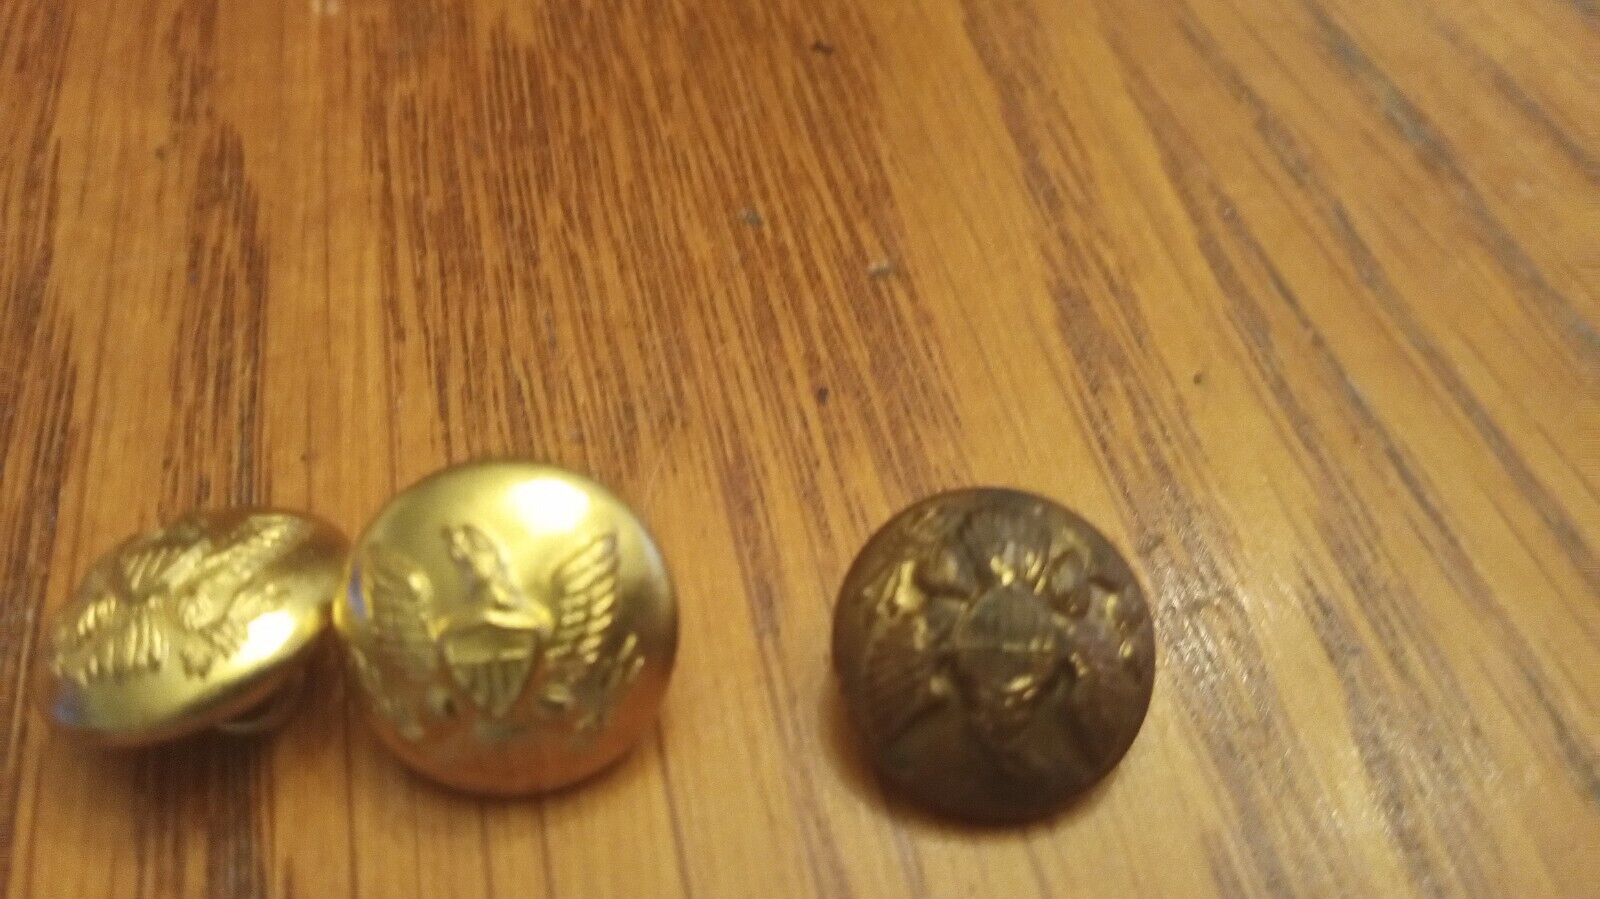 Three (3) Reproduction Federal Cuff Buttons